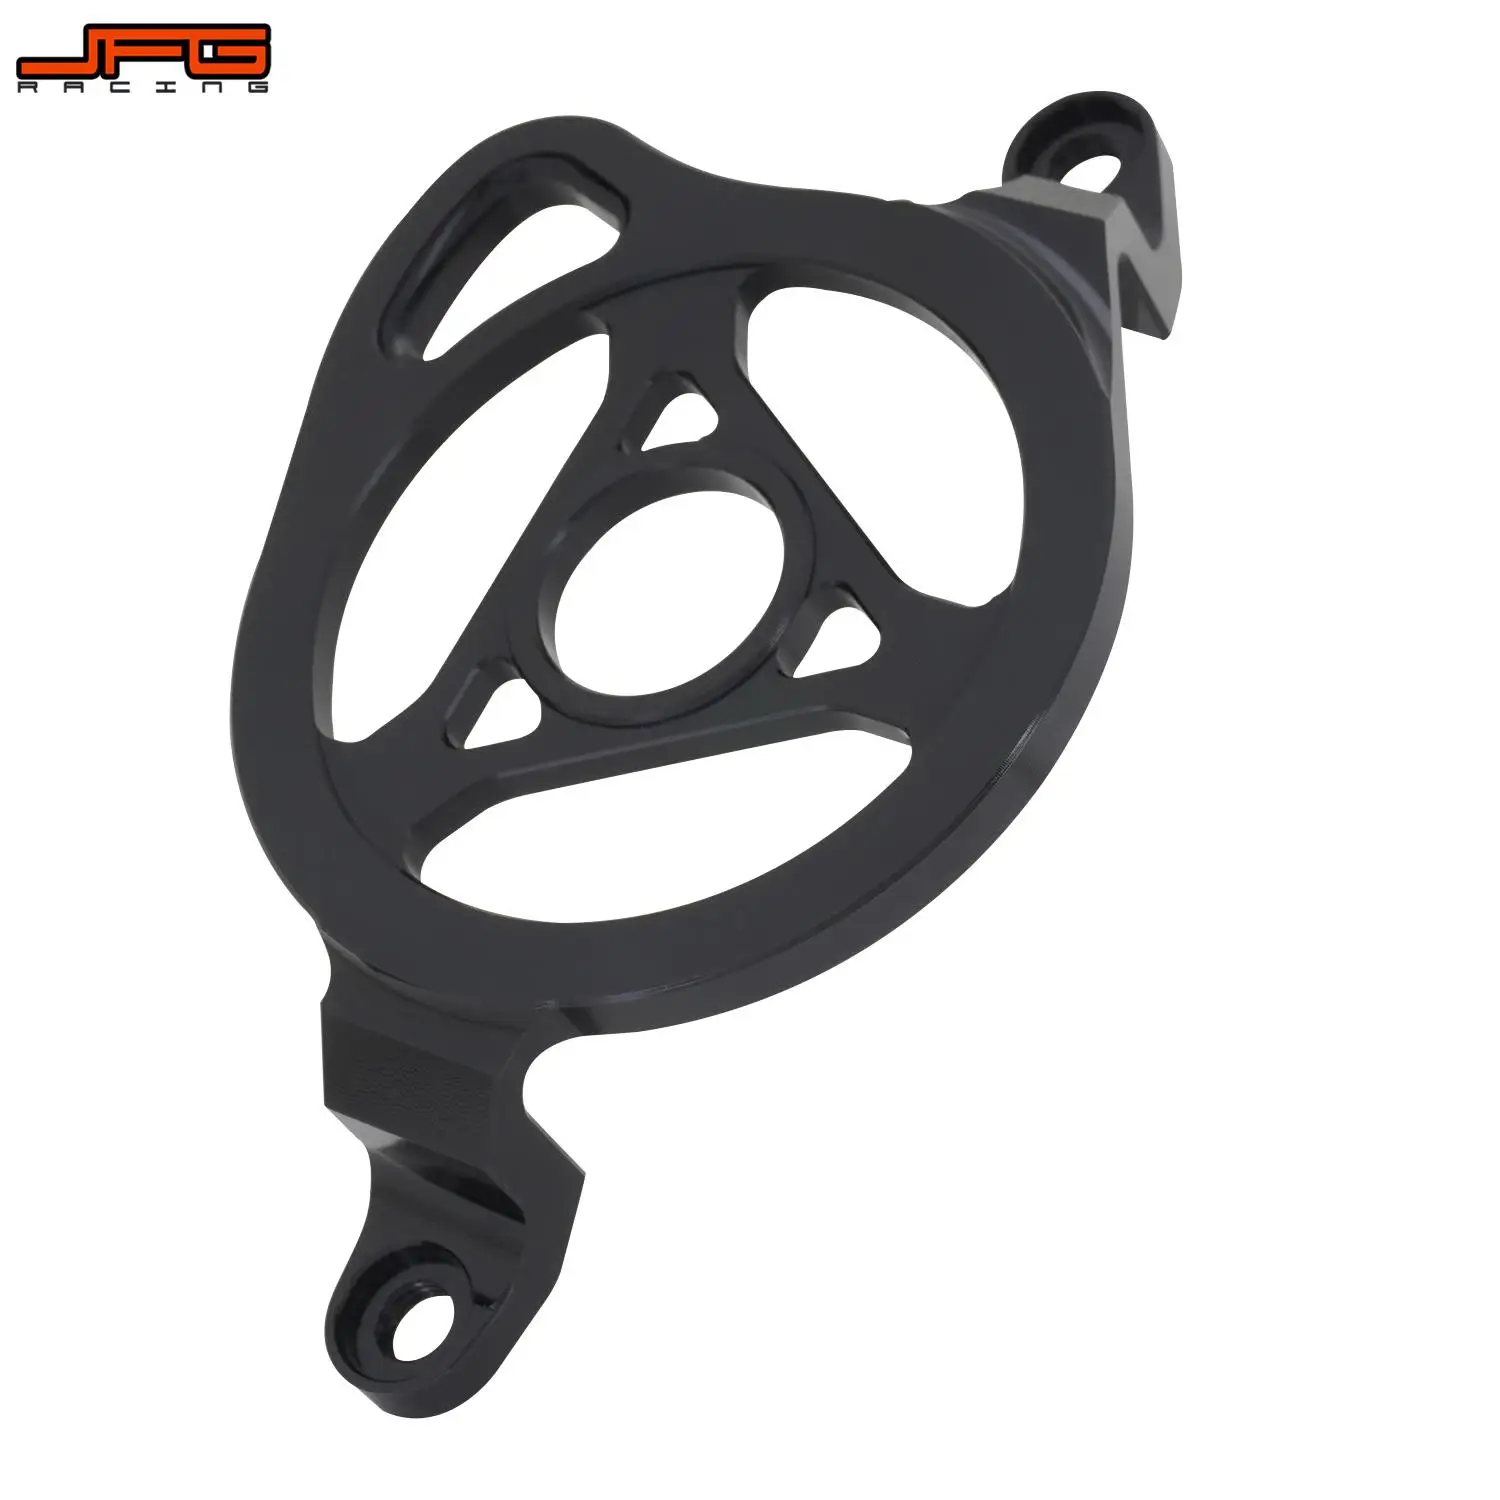 Motorcycle Engine Case Saver Cover Guard For Surron Sur-Ron Sur Ron Lightbee Light Bee X S Segway X160 X260 Electric Dirt Bike